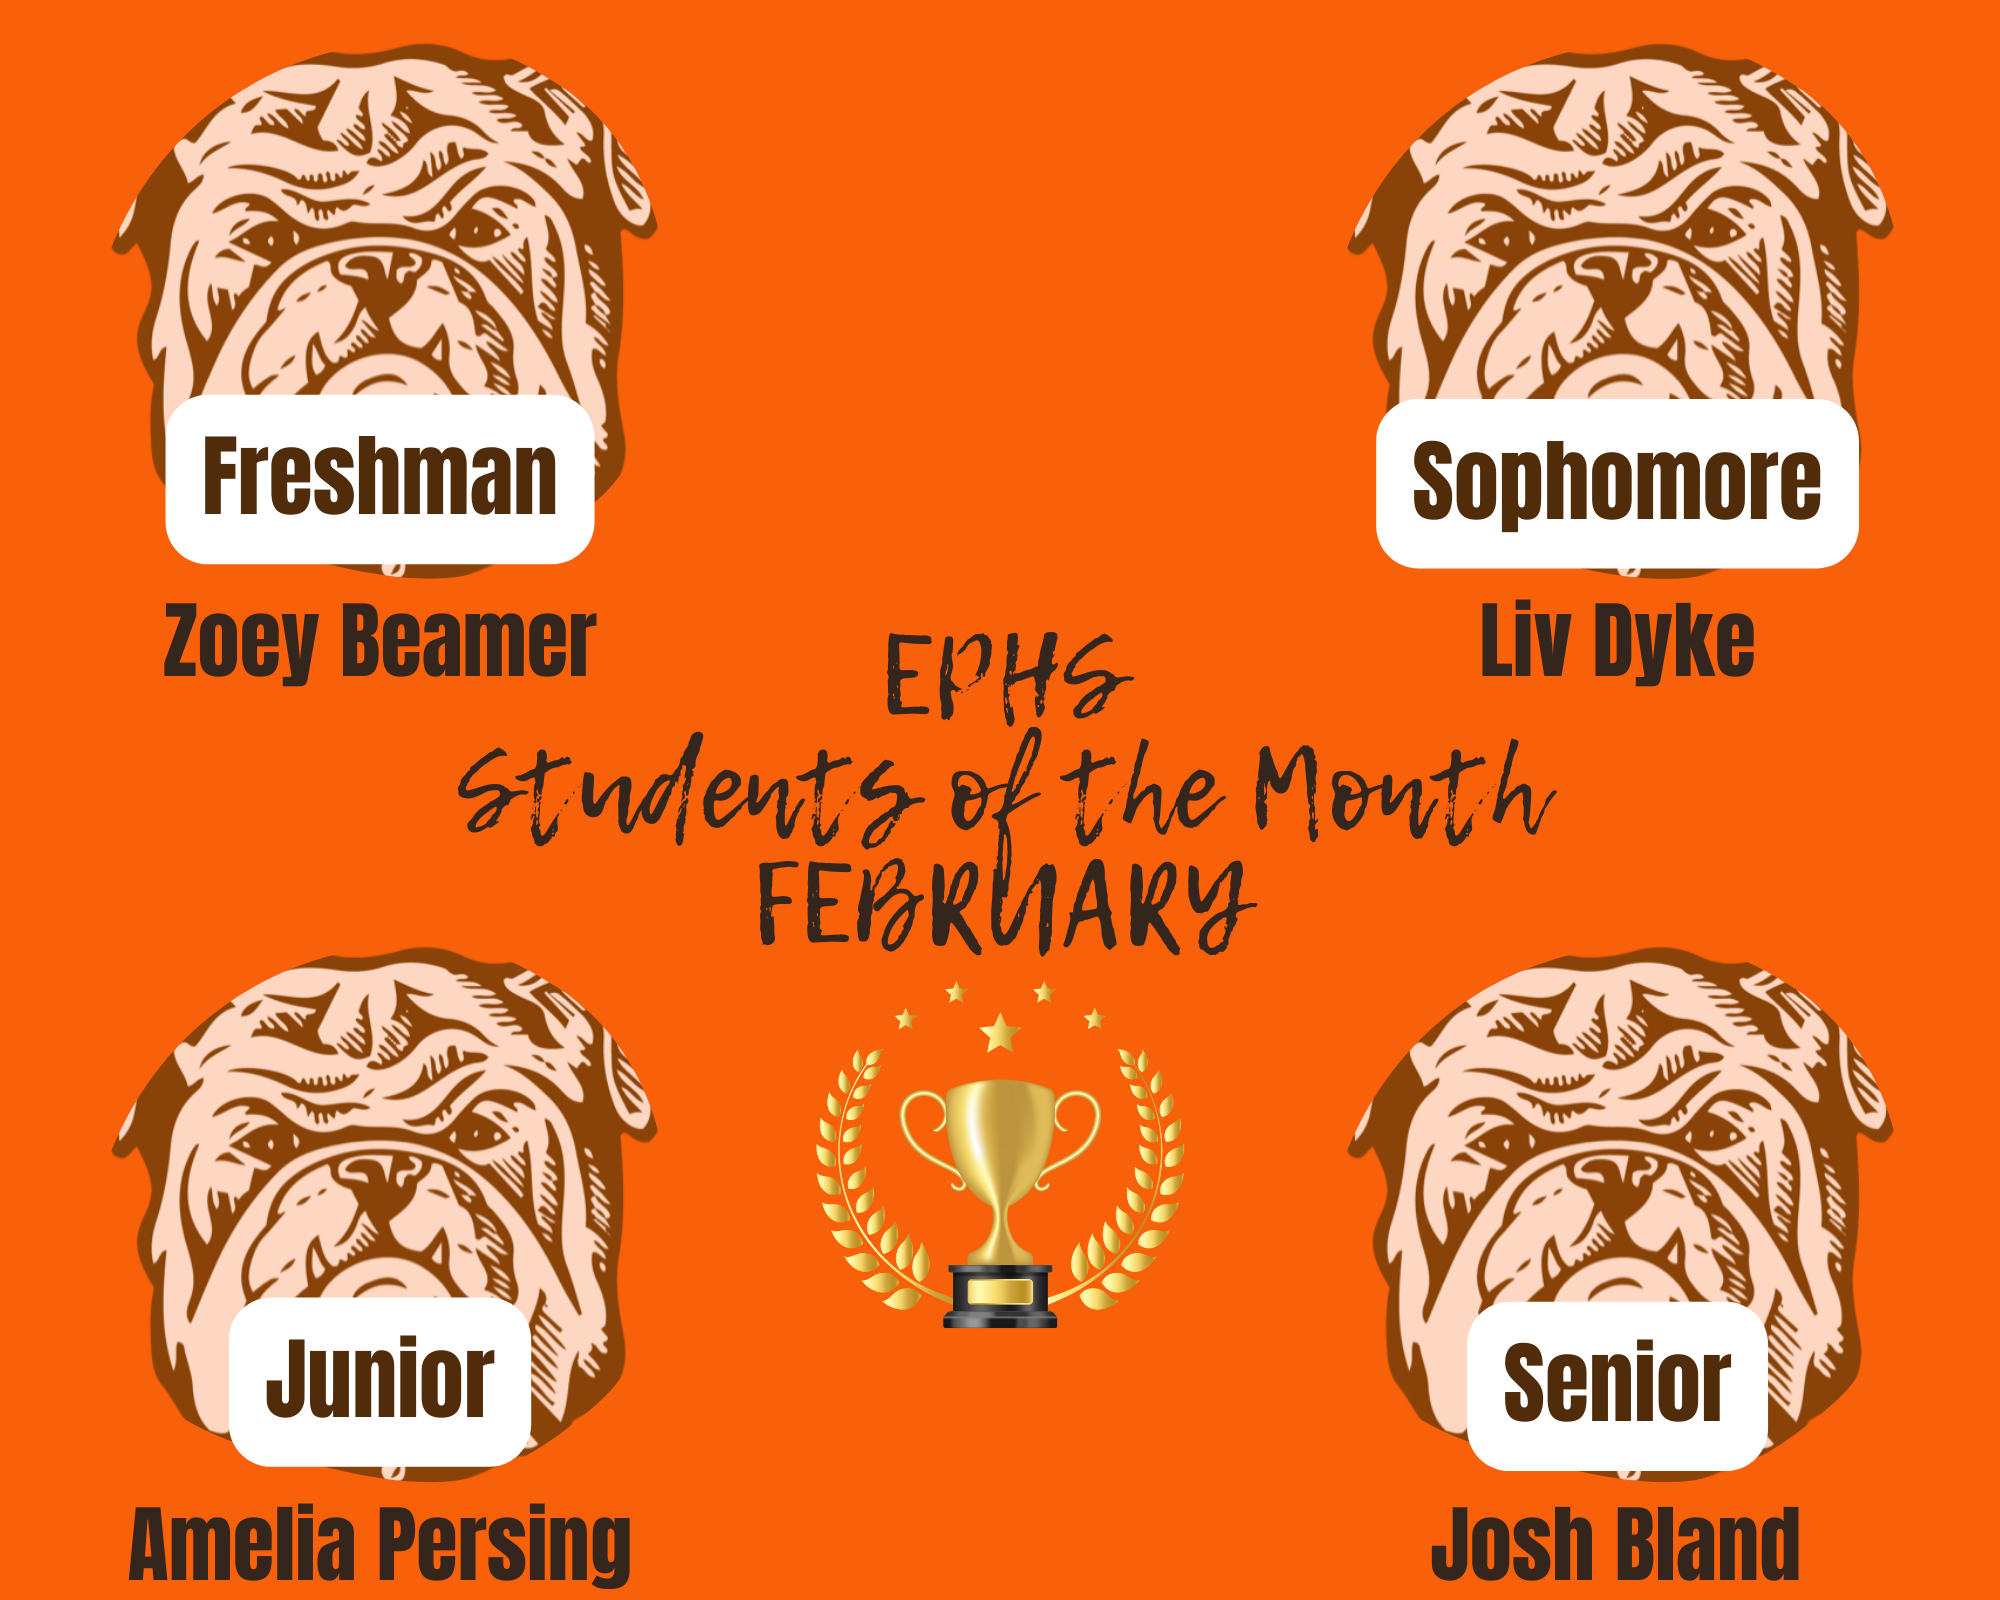 ephs students of the month